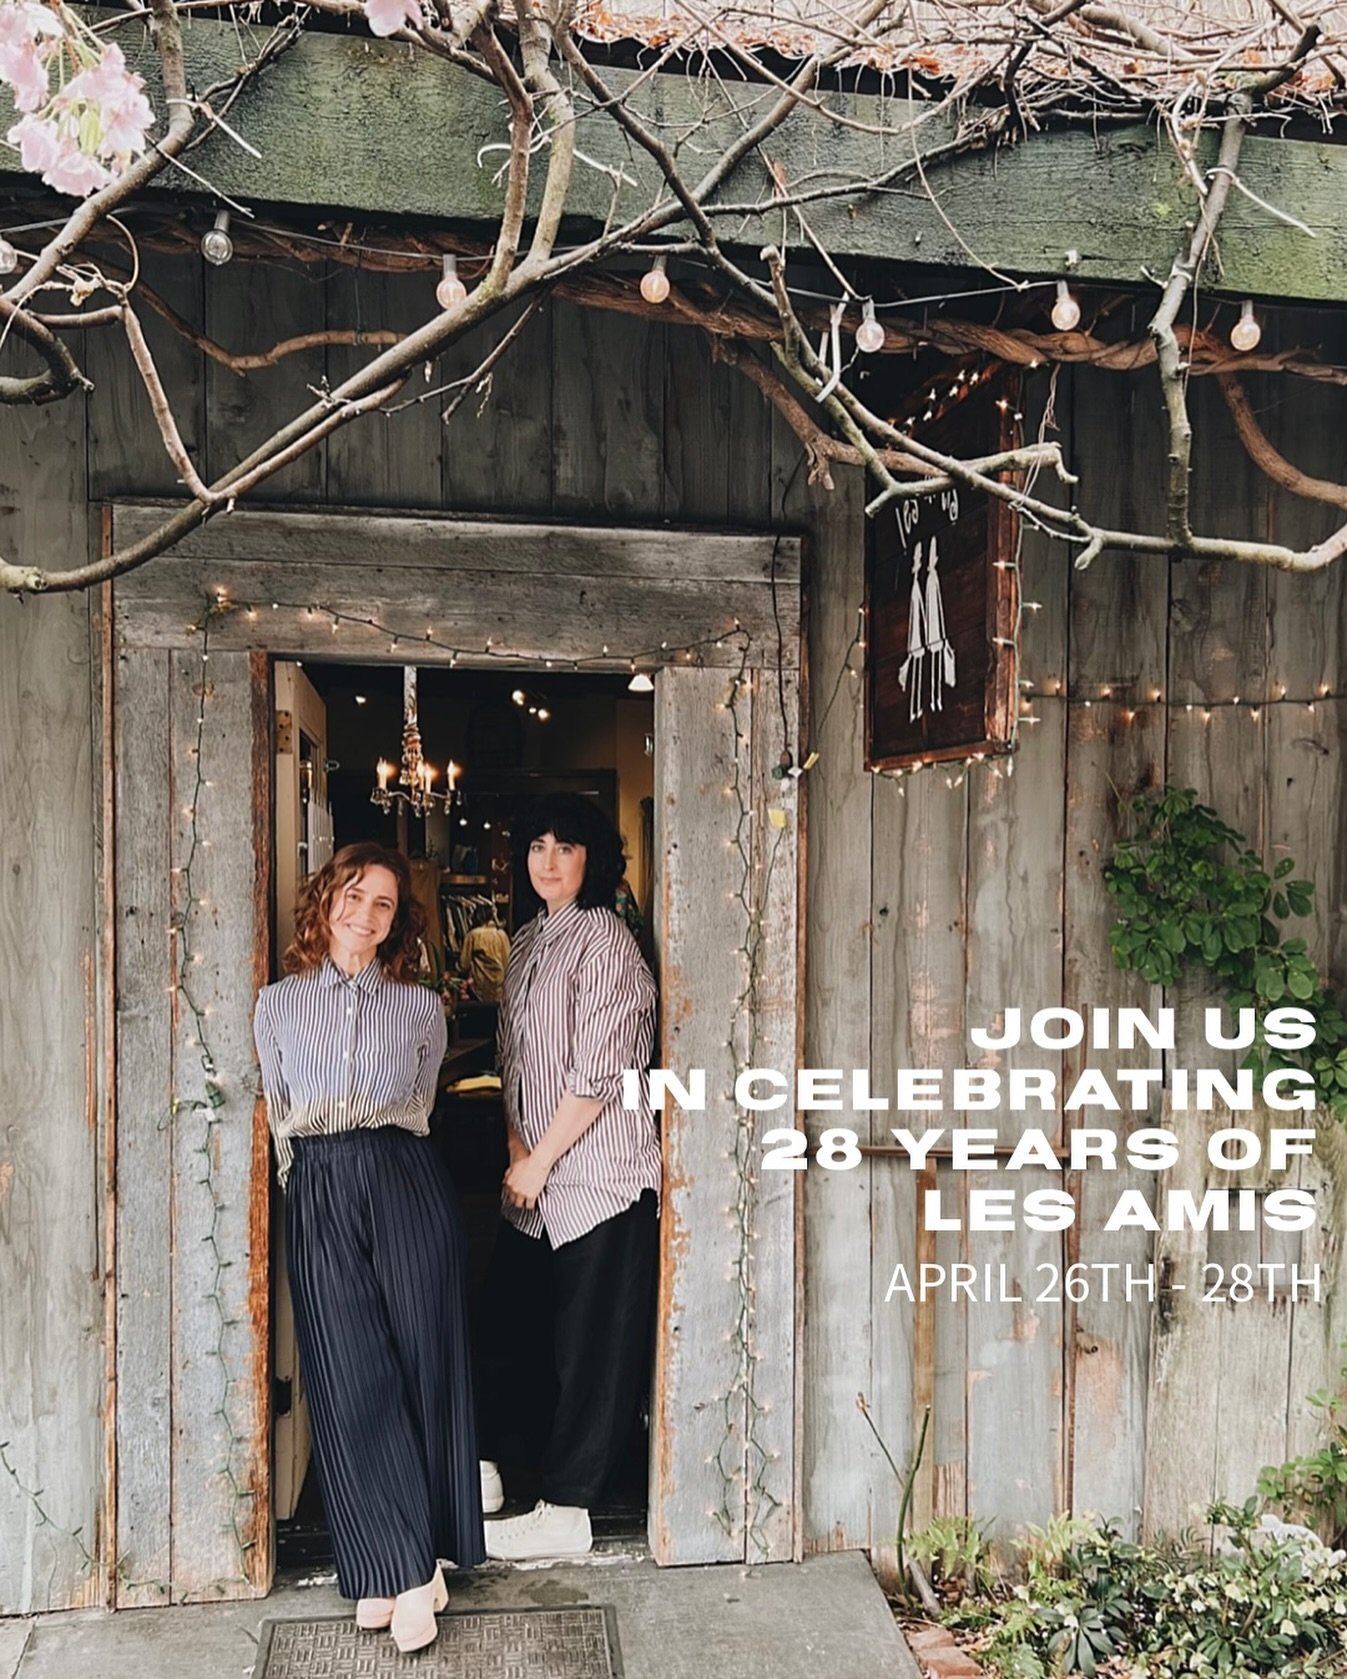 It&rsquo;s been 28 years since we first opened our doors and we are so grateful that our little shop around the corner has become the gathering place it is. Friendships and community, life&rsquo;s moments big and small, it is such a gift to share in 